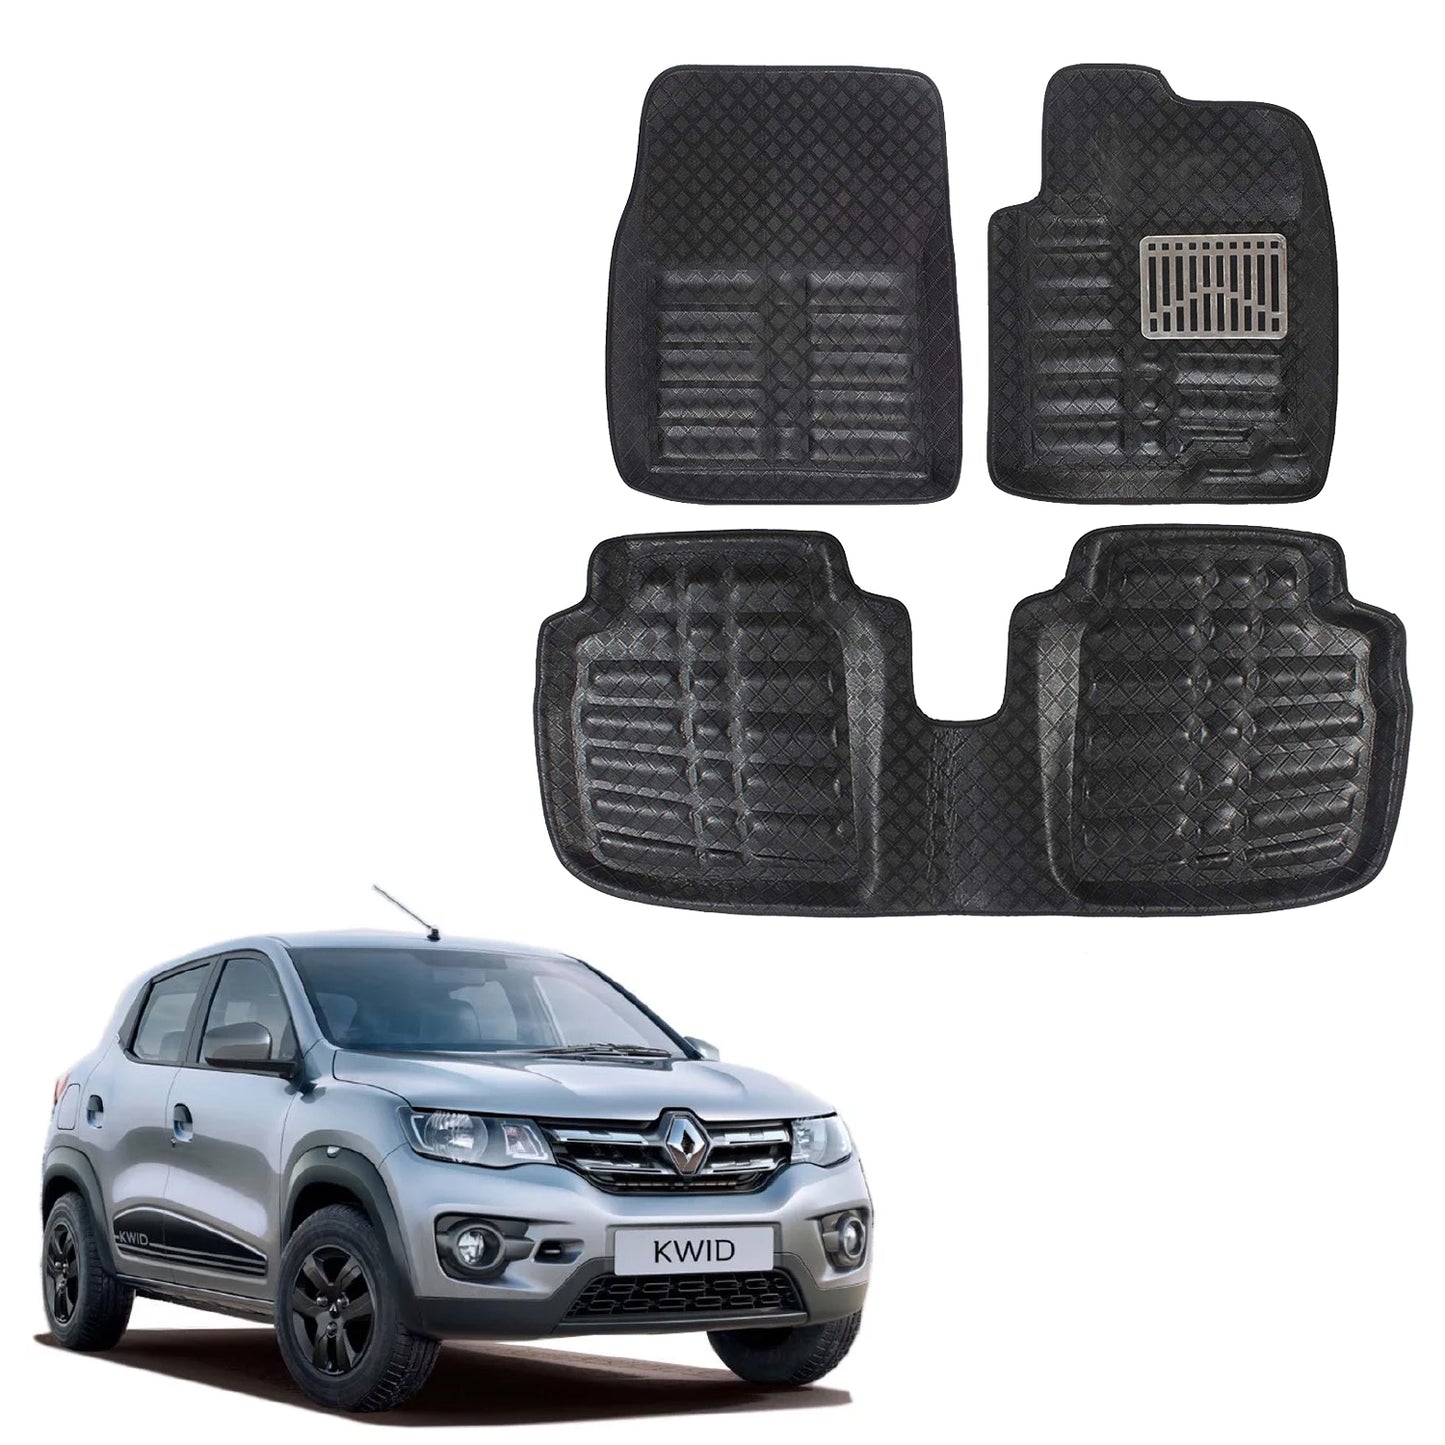 Oshotto 4D Artificial Leather Car Floor Mats For Renault Kwid - Set of 3 (2 pcs Front & one Long Single Rear pc) - Black